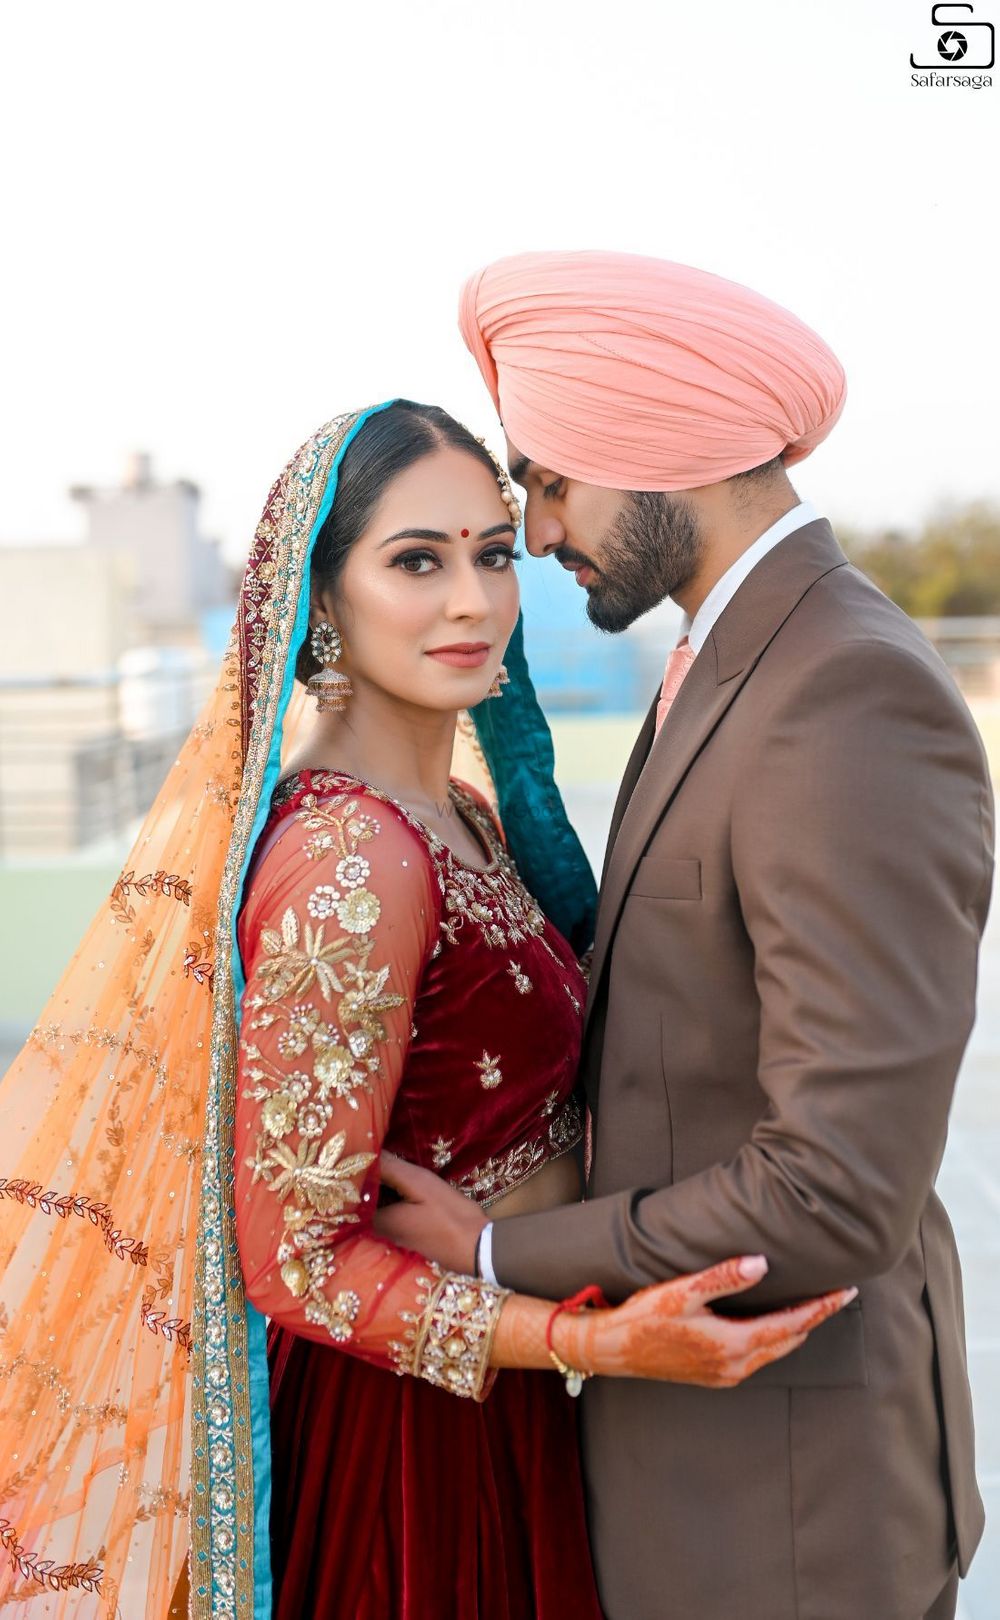 Photo of A beautiful couple portrait of a Sikh bride and groom.